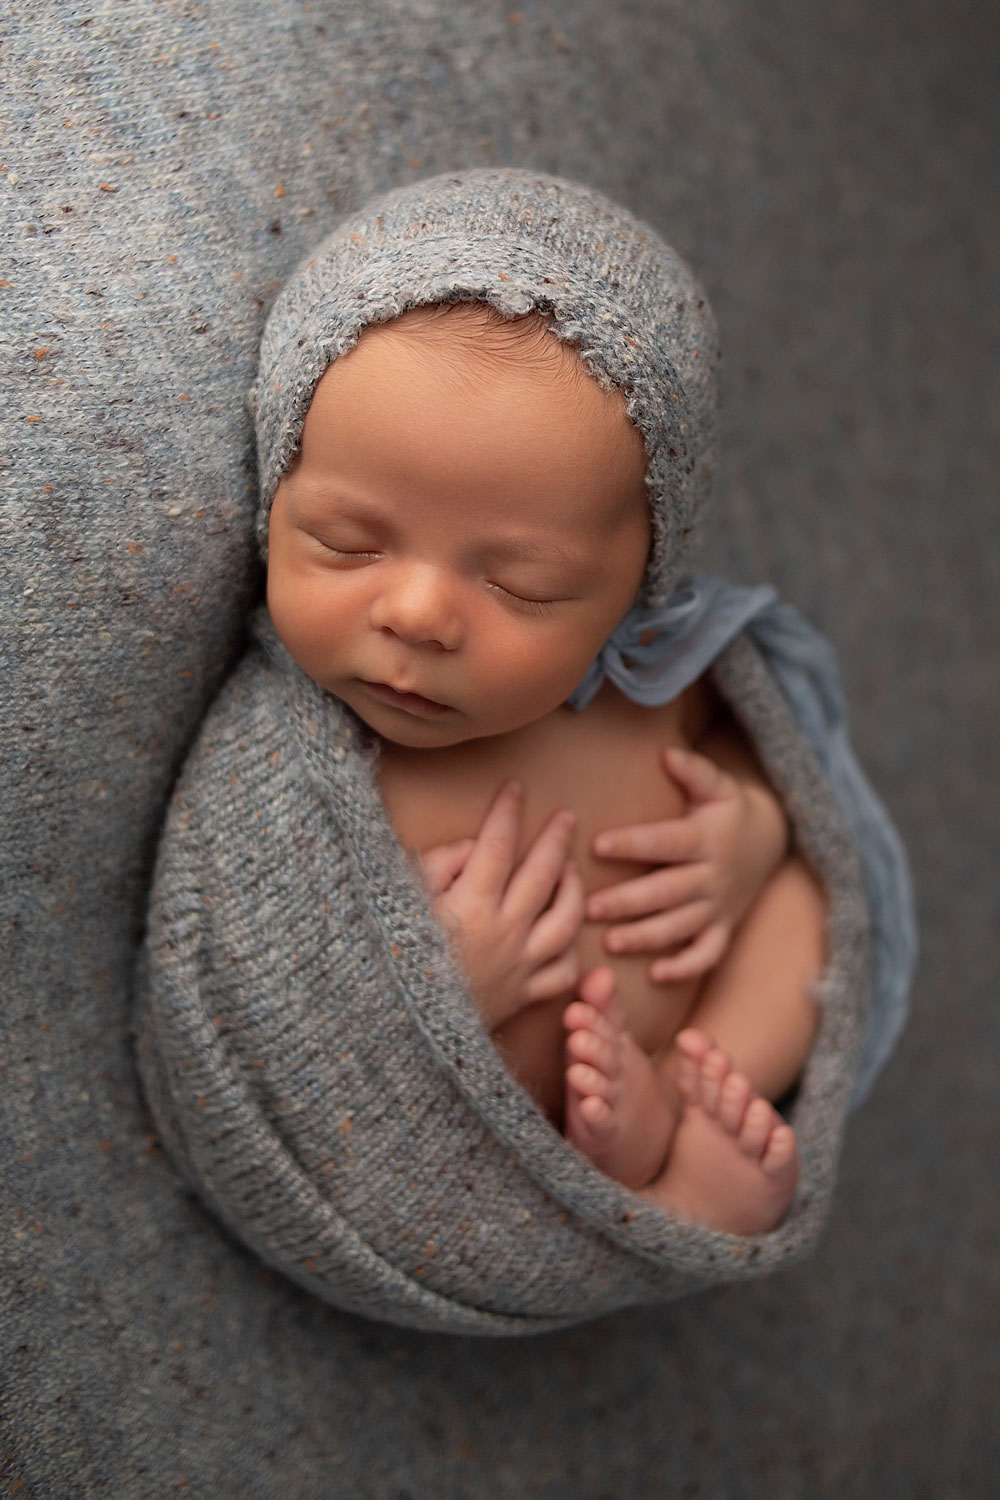 newborn-posed-on-gray-backdrop-with-bonnet